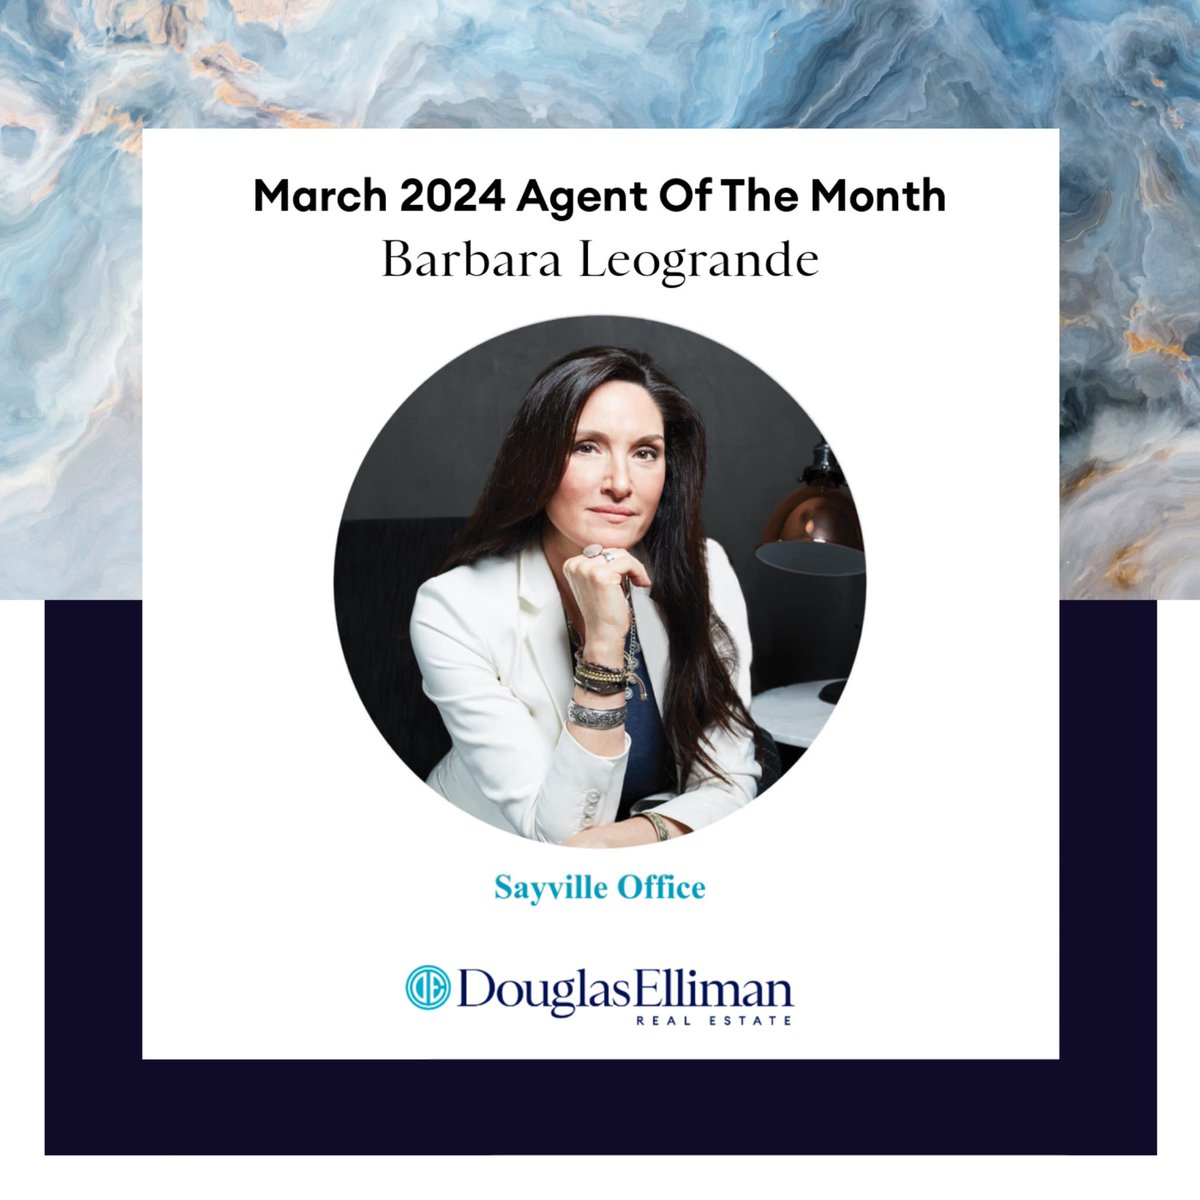 Congratulations to all of my amazing clients that made March remarkable! ❤️ #AgentOfTheMonth 🏠
.
.
.
.
#SoldByBarbara #CallBarbara #ILoveWhatIDo #ListenToYourBroker #ListWithMe #BuyWithMe #DouglasElliman #DouglasEllimanRealEstate #DE #EllimanAgents #EllimanLI #LongIsland